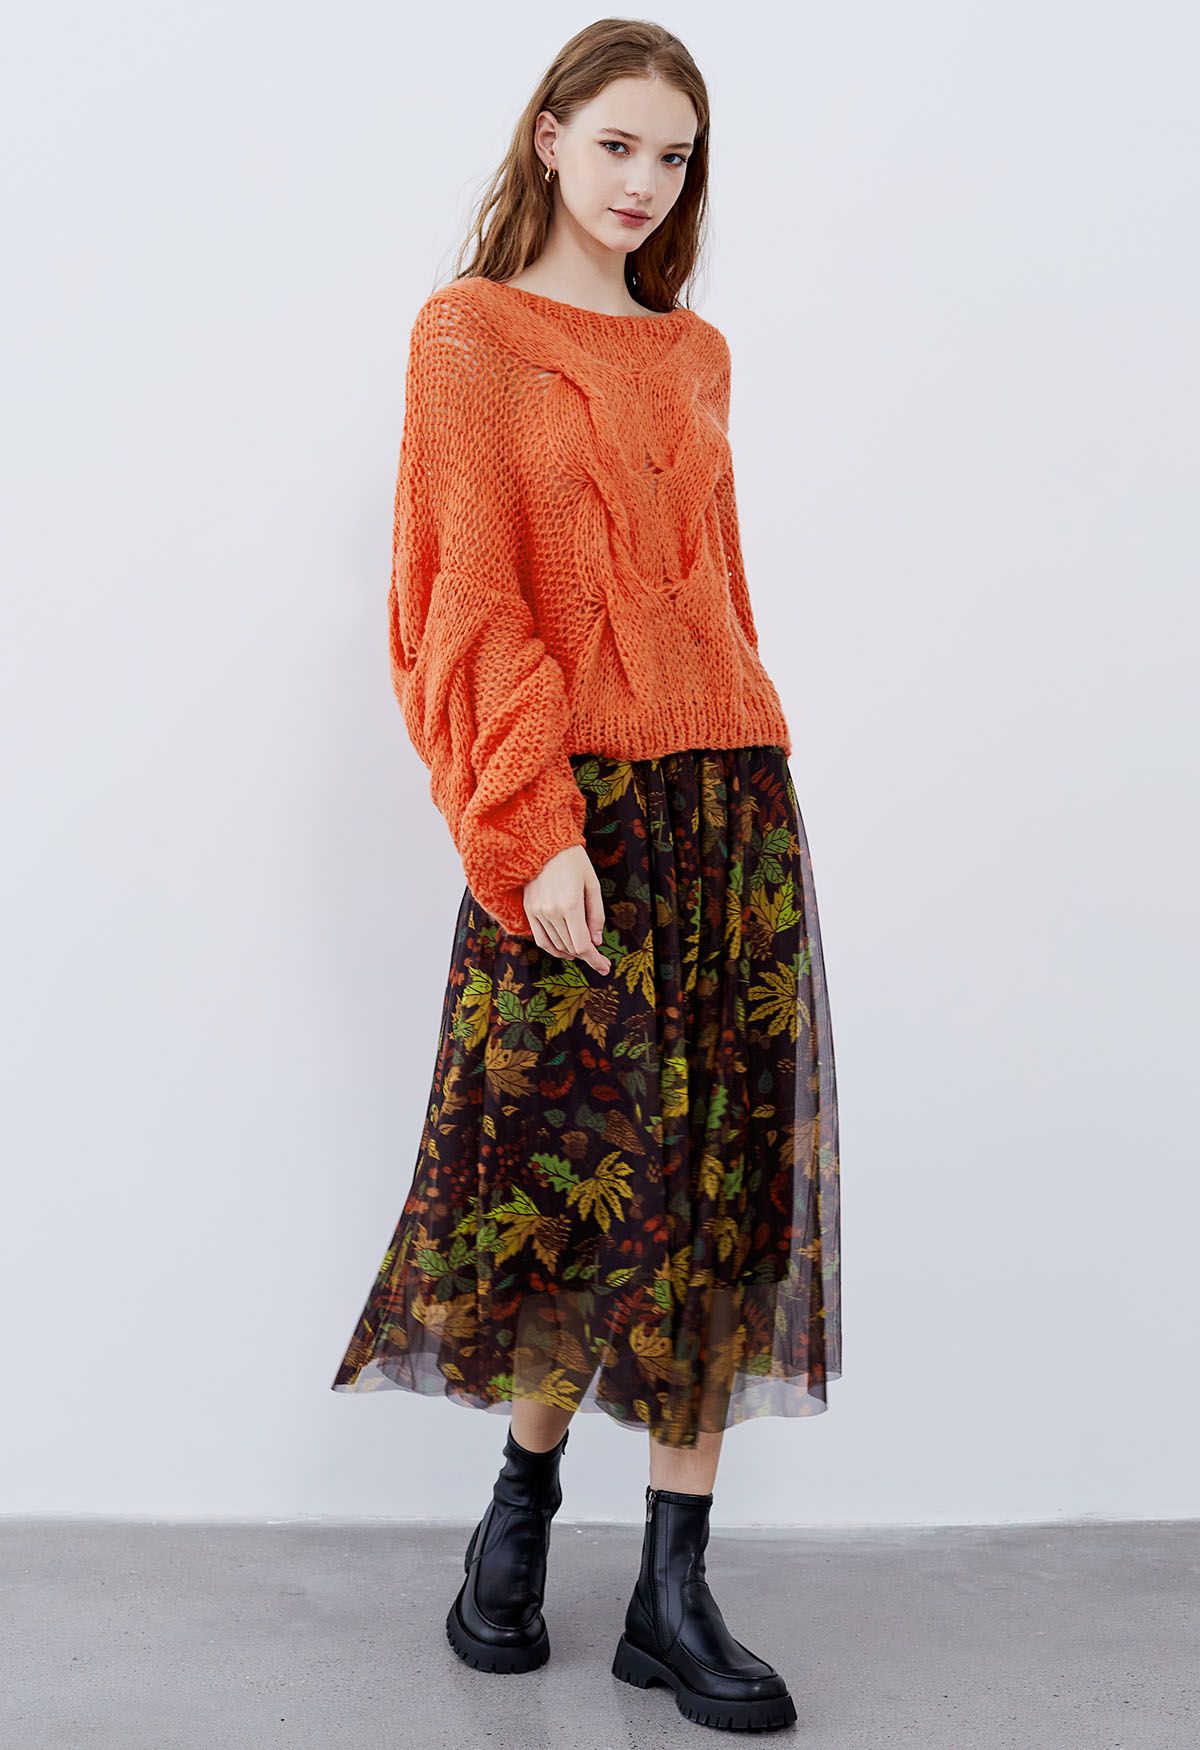 Hand-Knit Puff Sleeves Sweater in Orange